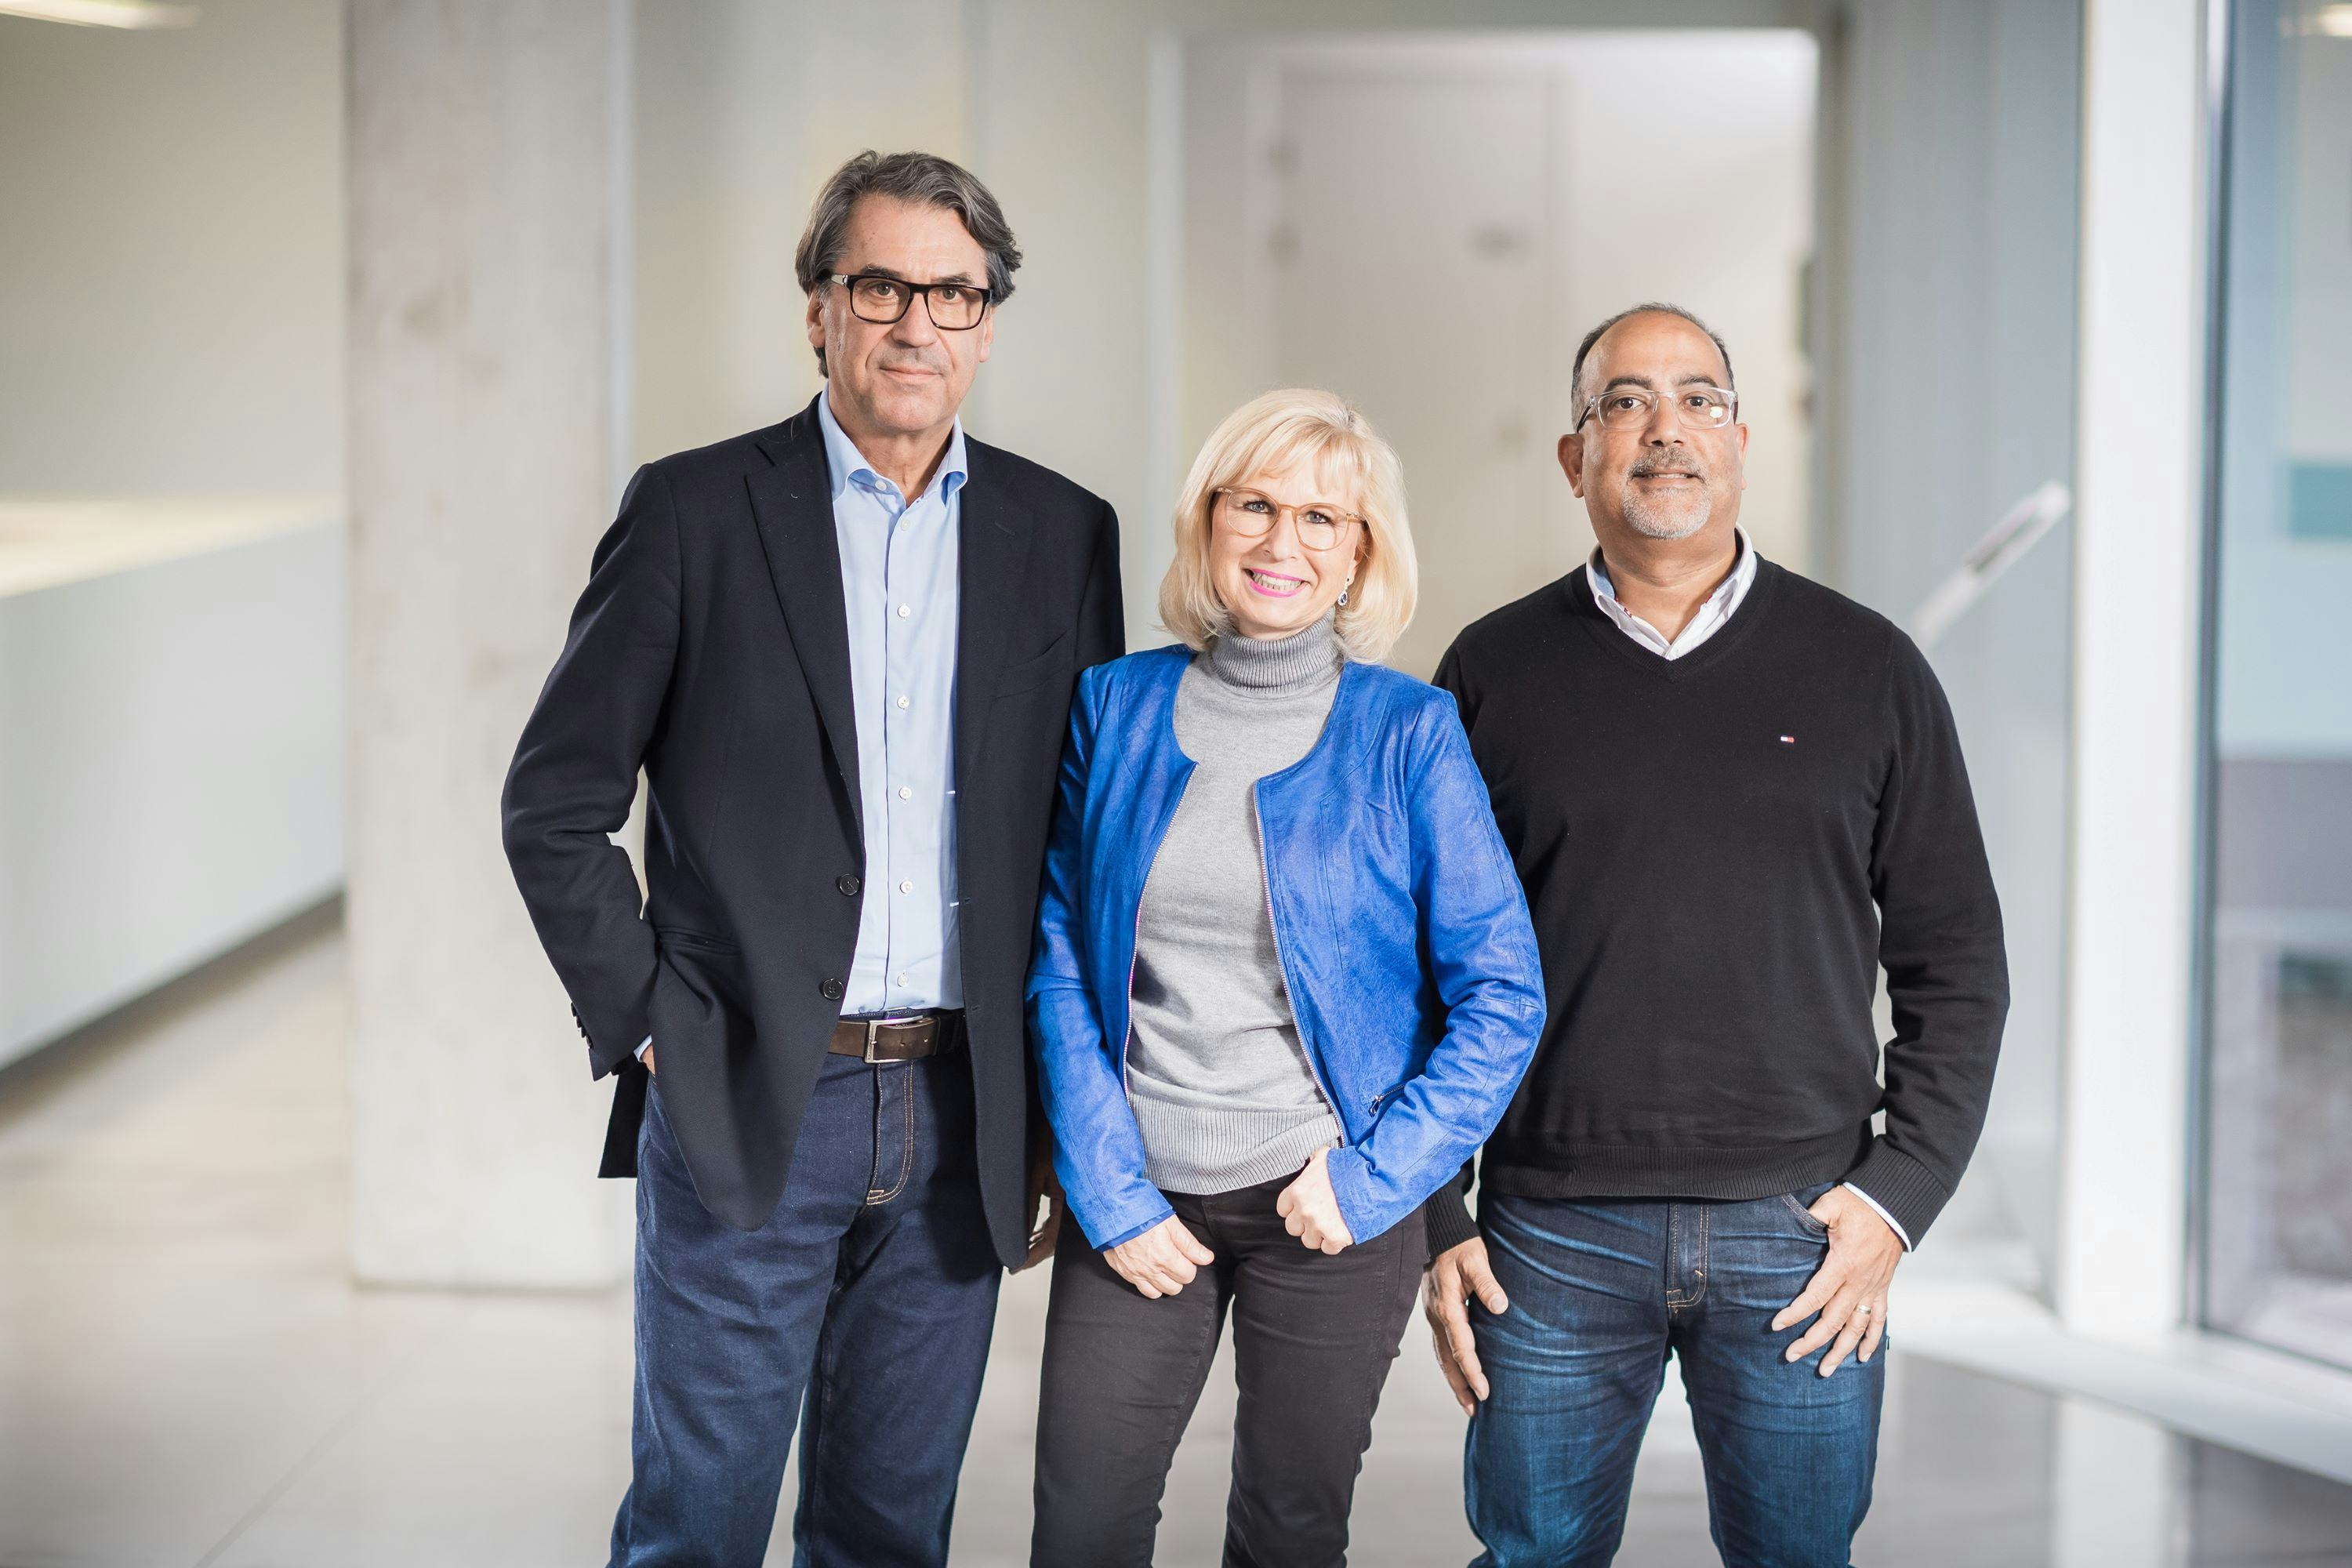 Pierer Mobility AG, CEO Stefan Pierer (left) together with Pexco Managing Directors, Susanne and Felix Puello, who now also act as CMO/CSO and COO/CTO of Husqvarna E-Bicycle GmbH. - Photo Pierer Mobility  